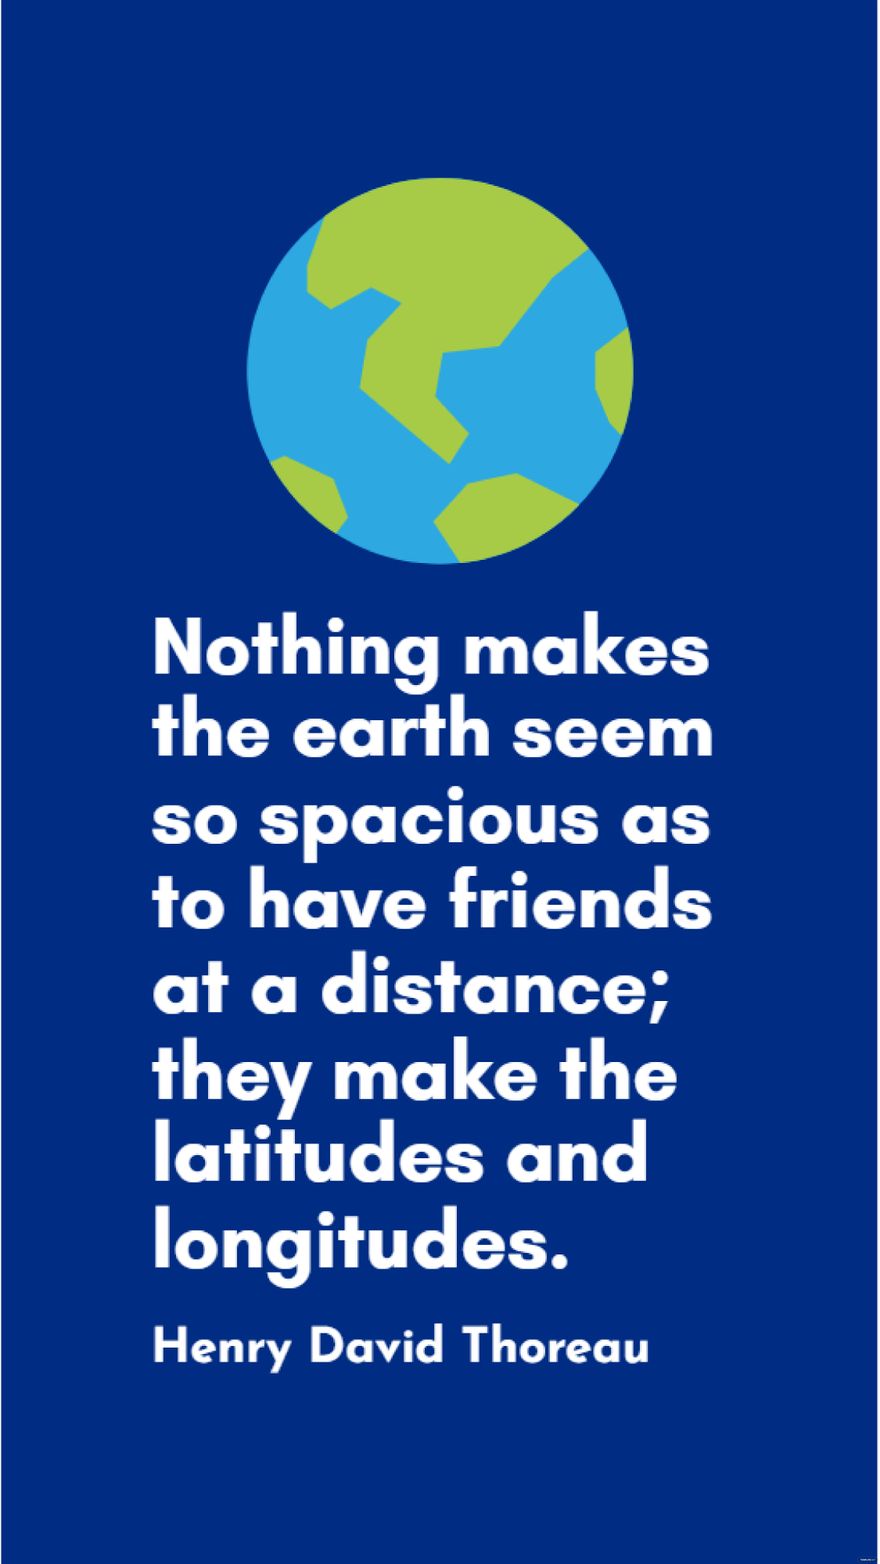 Henry David Thoreau - Nothing makes the earth seem so spacious as to have friends at a distance; they make the latitudes and longitudes.